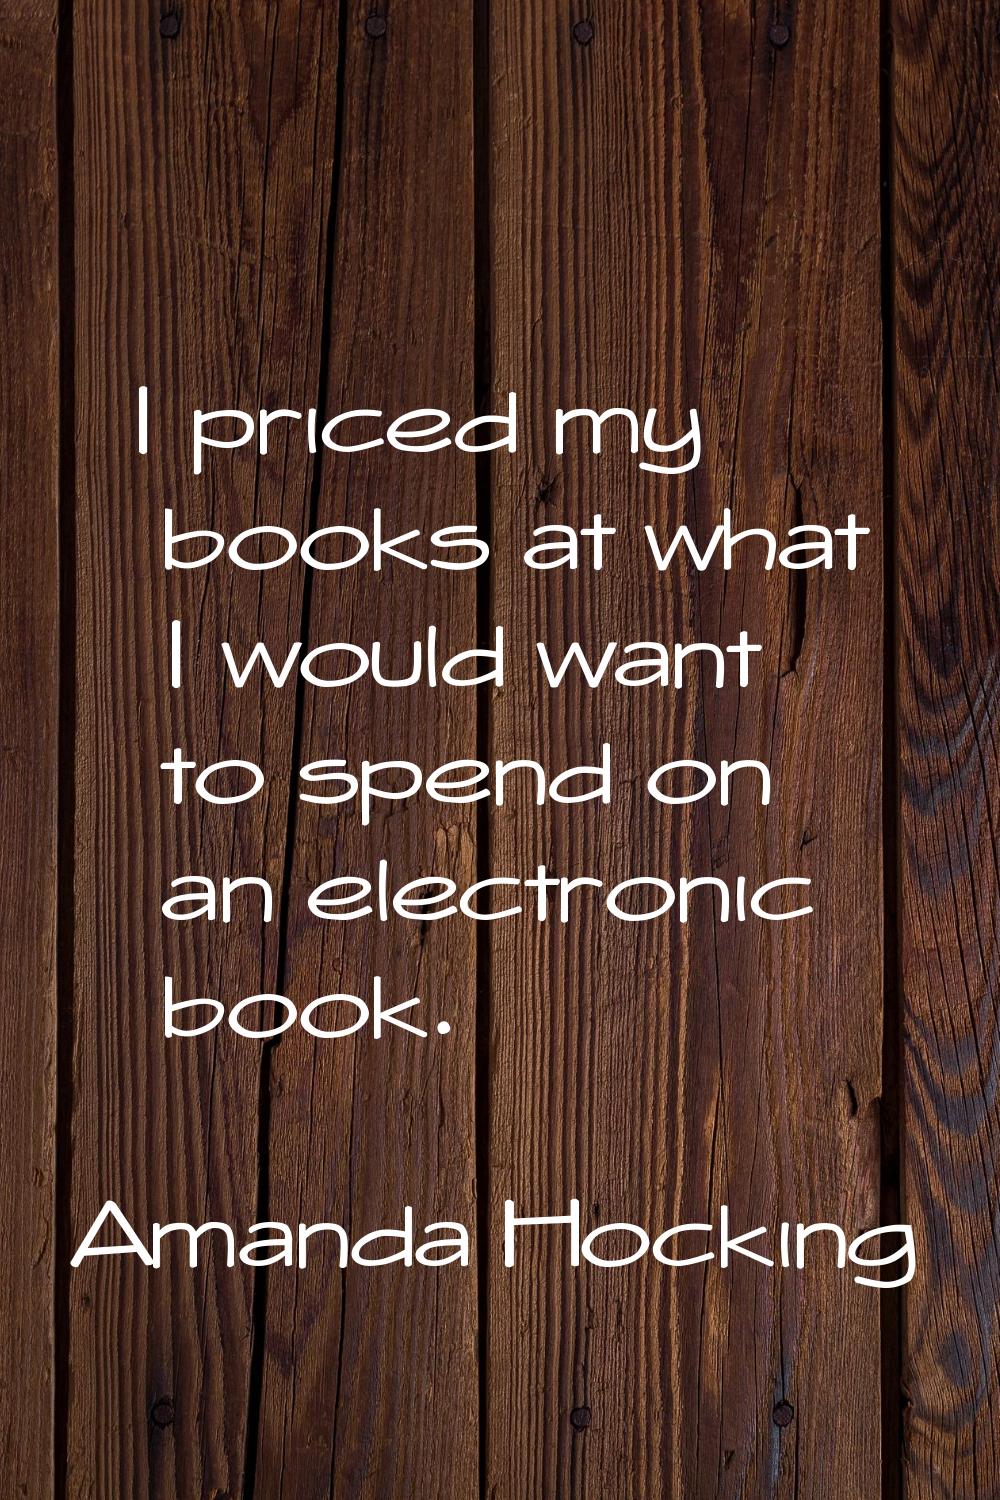 I priced my books at what I would want to spend on an electronic book.